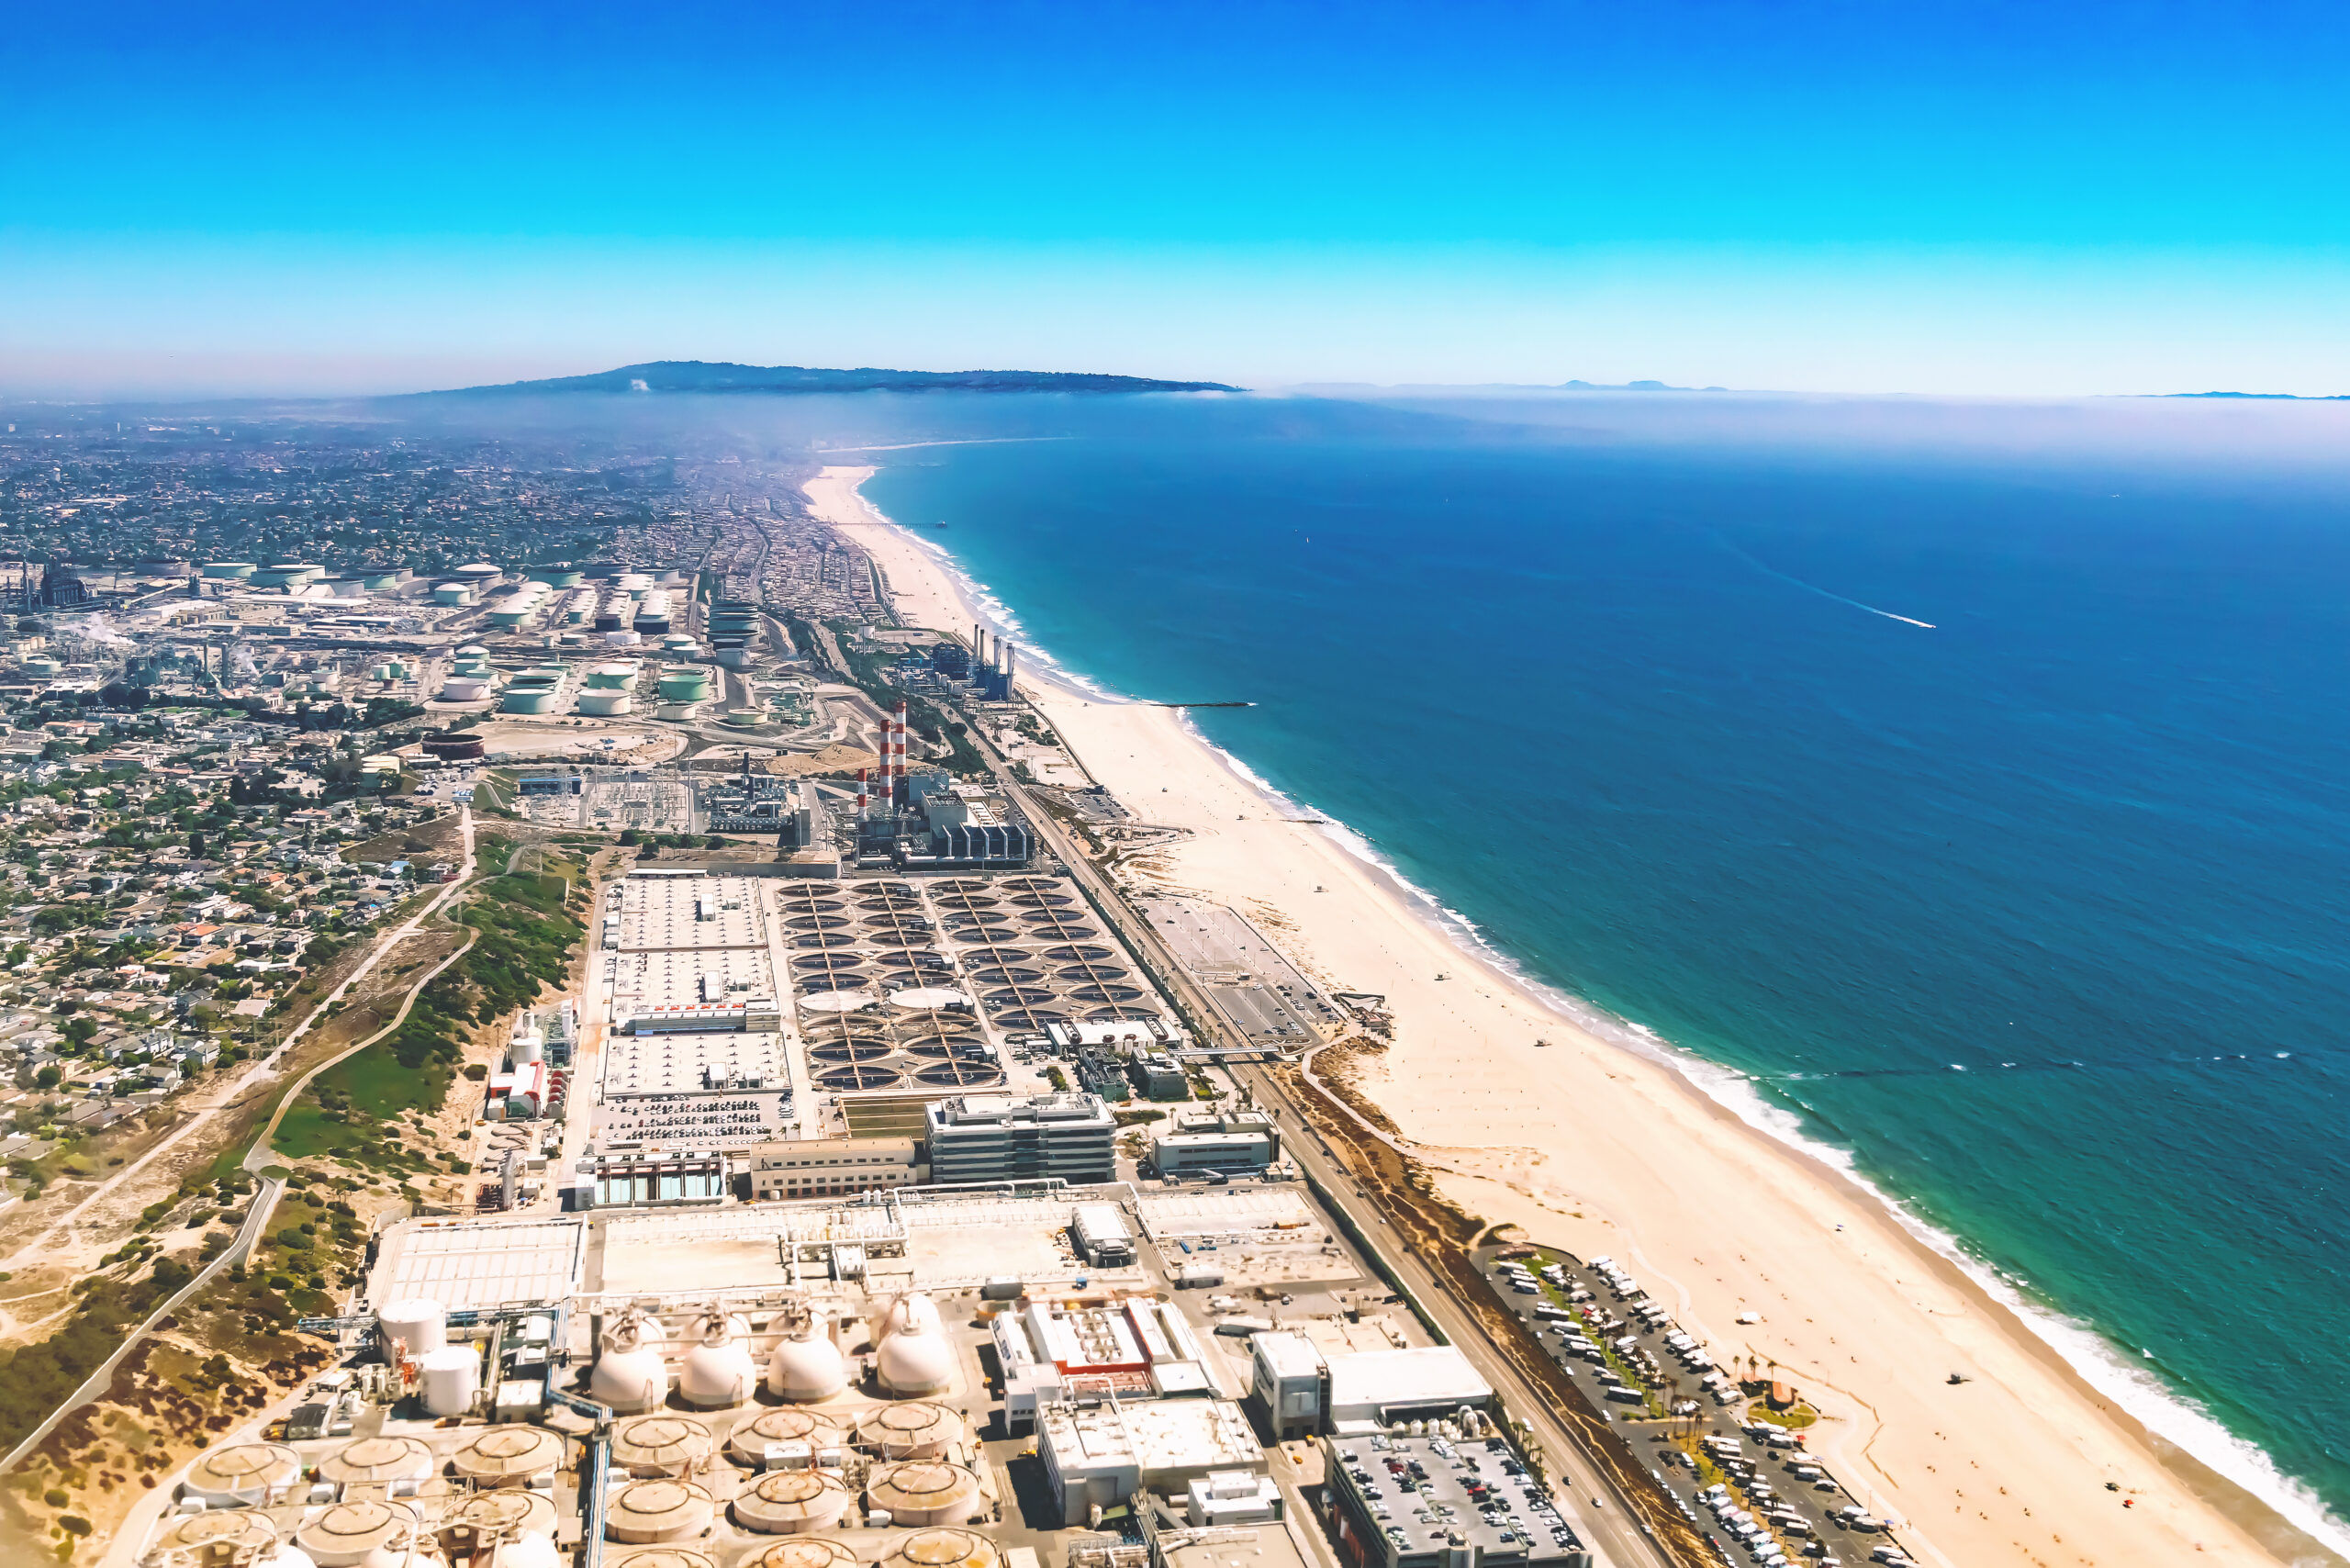 Aerial view of an oil refinery on the beach of El Segundo, Los Angeles, CA